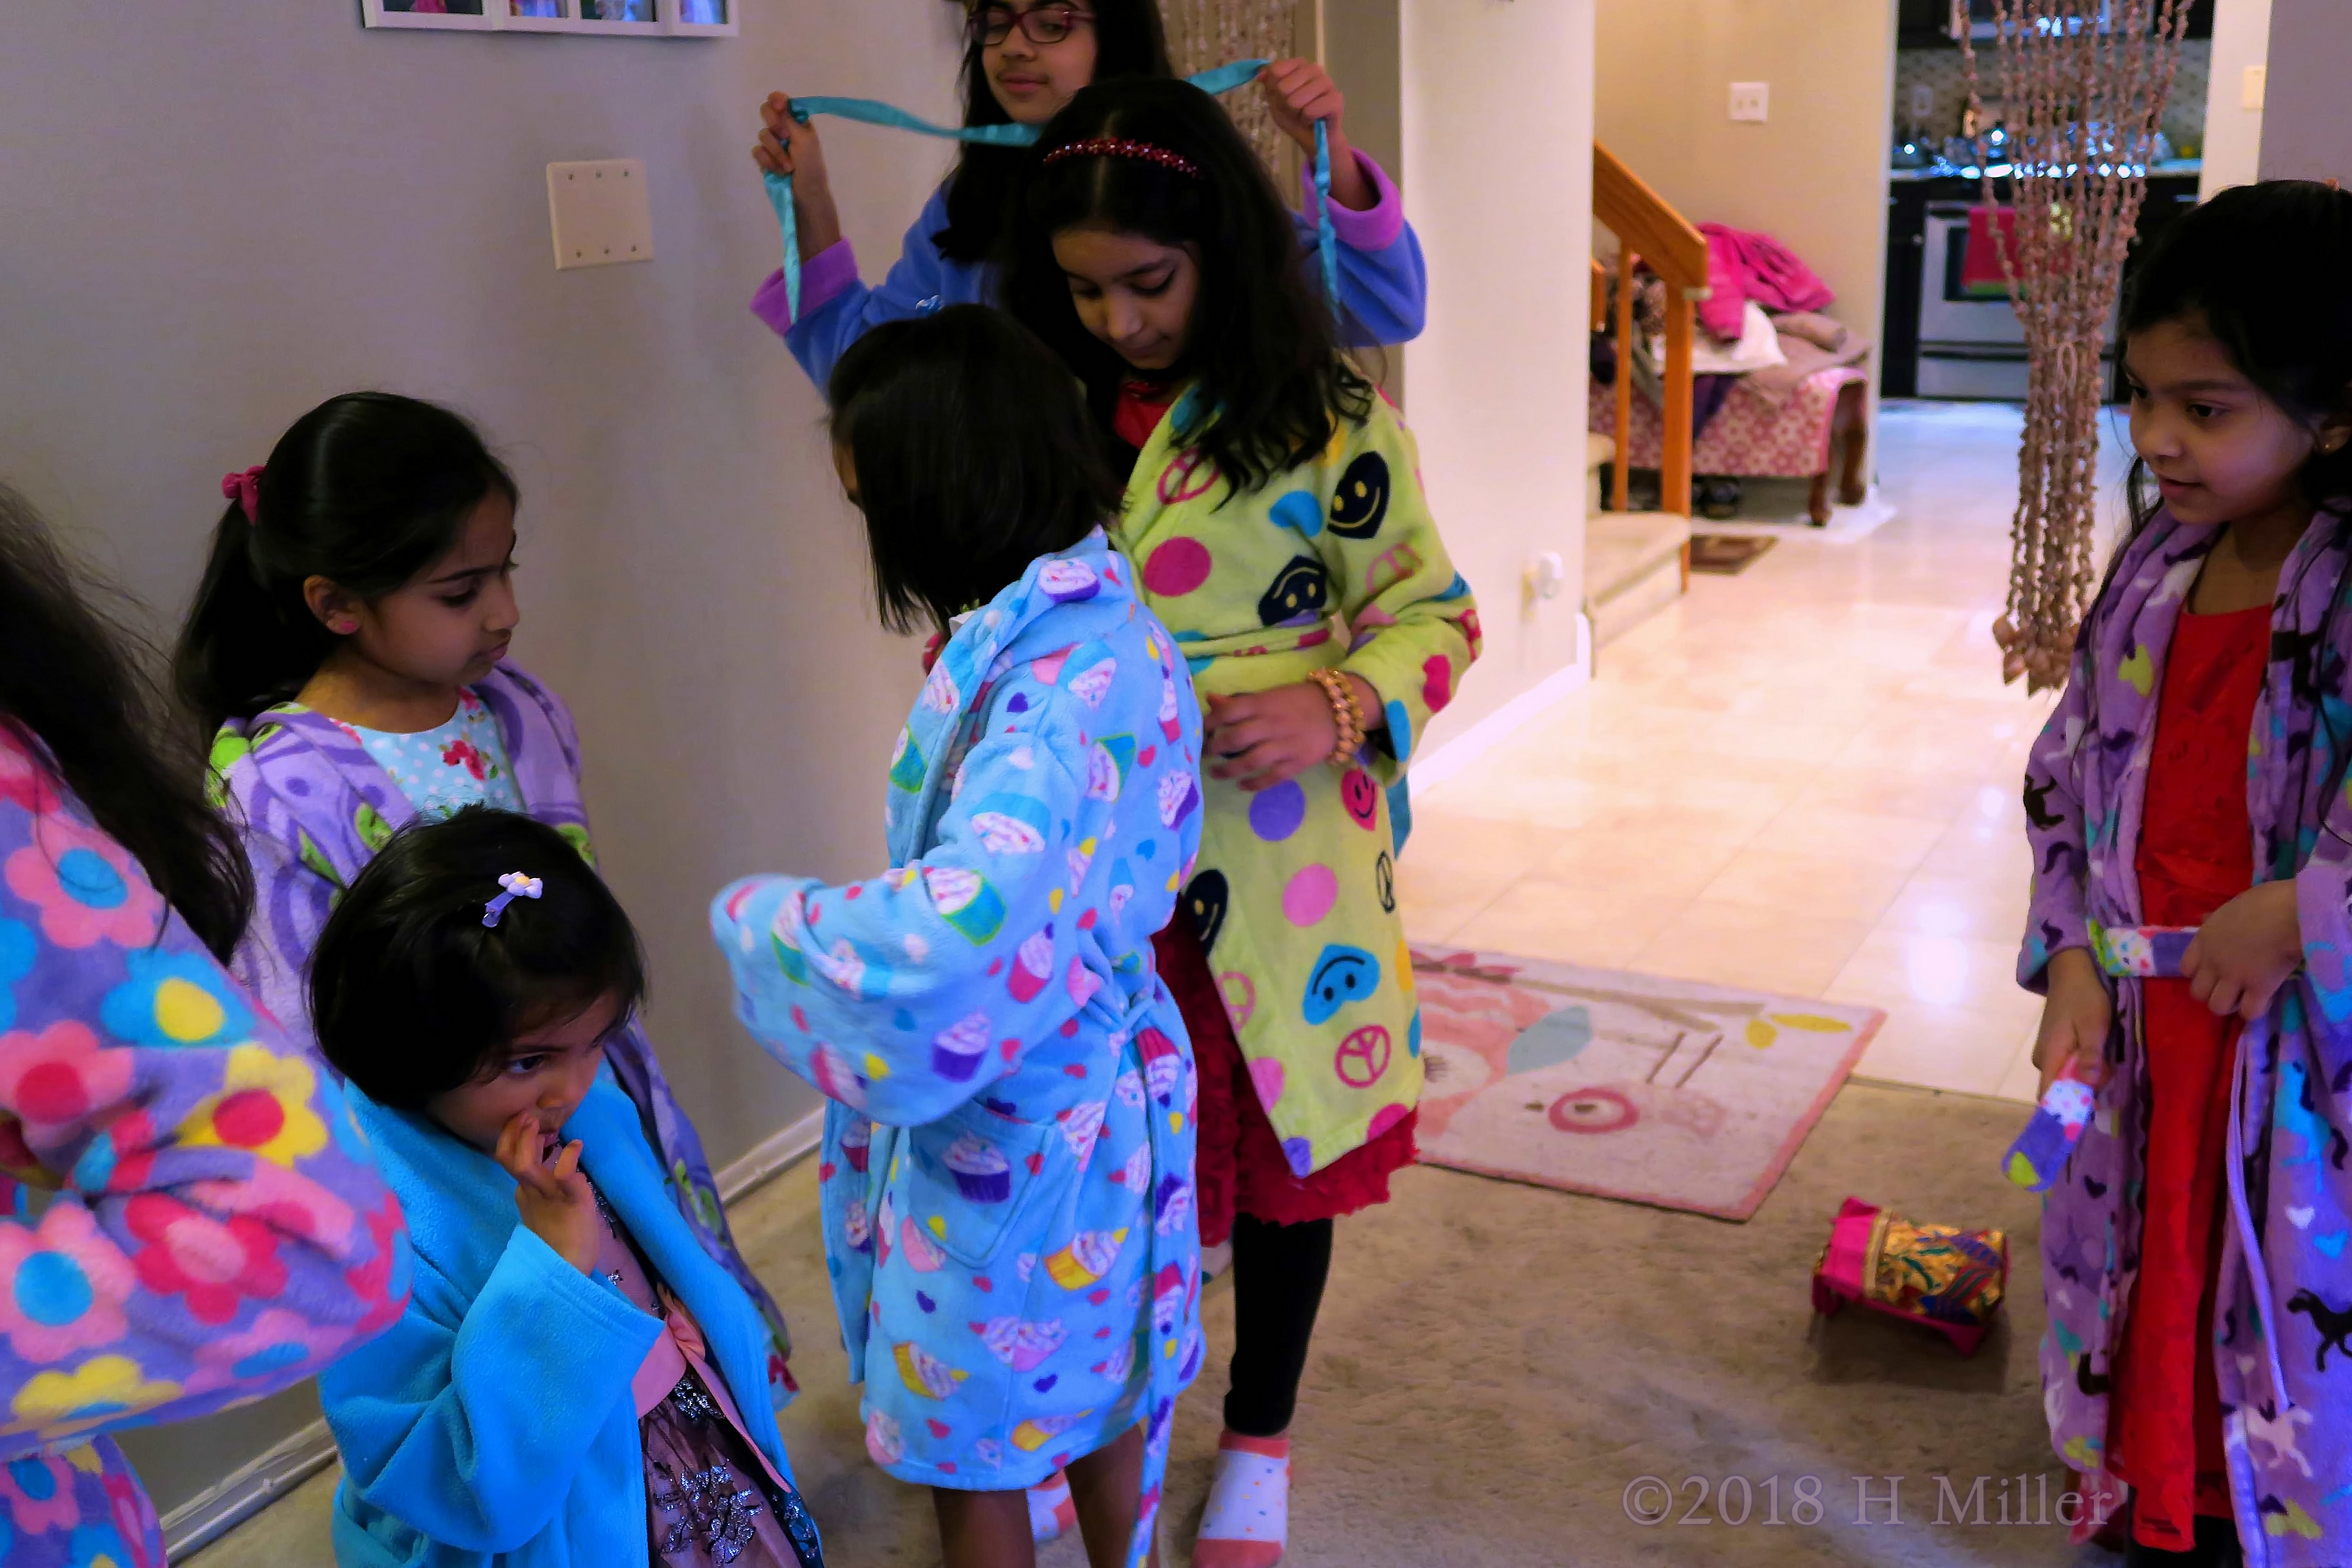 The Girls Are Almost Done With Putting On Their Spa Robes! 4